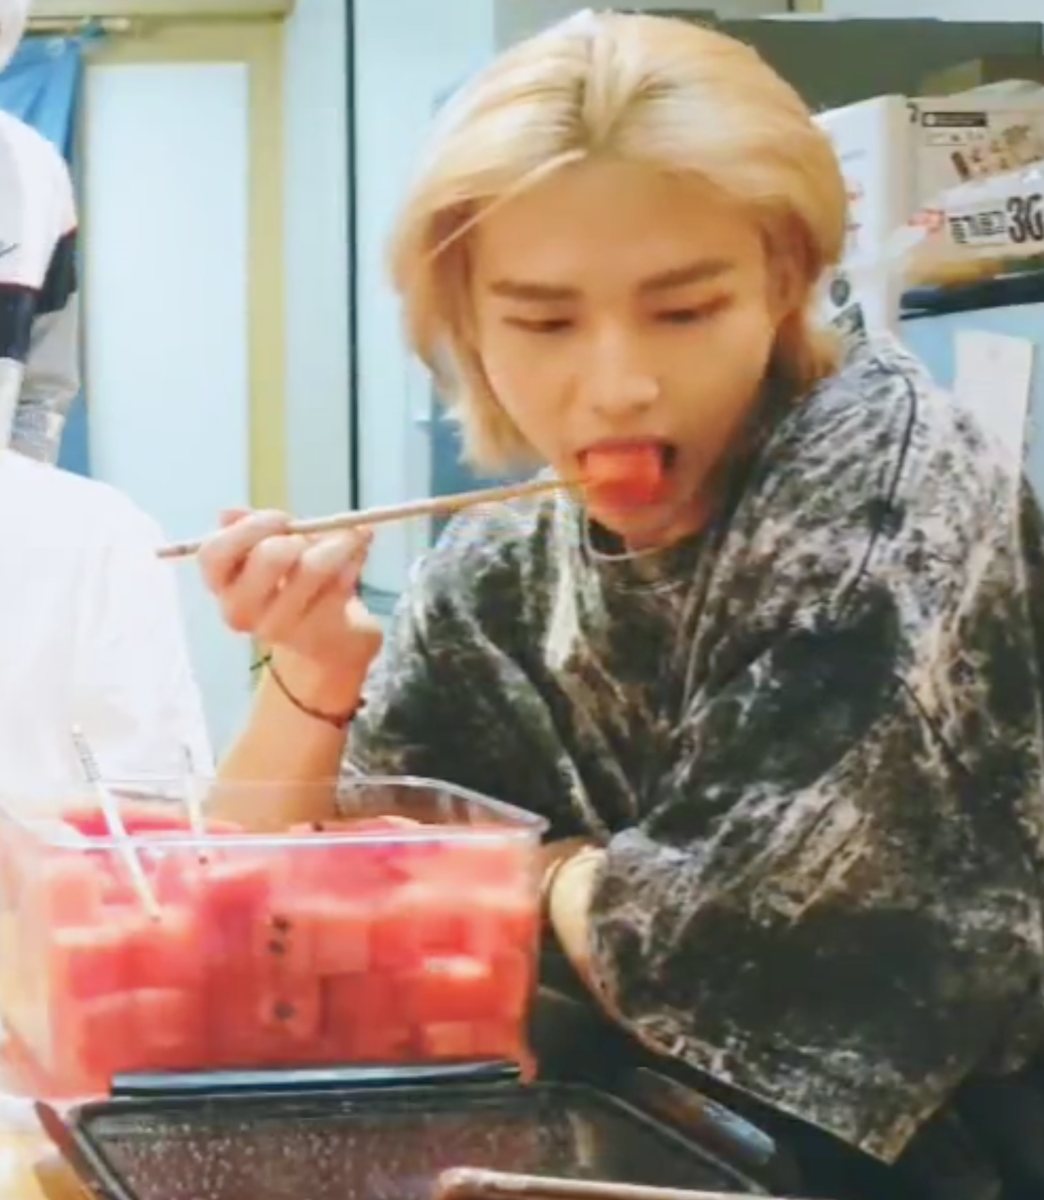 hyunjin said his mom gave them this watermelon todaymaybe he went grocery shopping with his mom? https://twitter.com/shmesm2/status/1287040872559730688